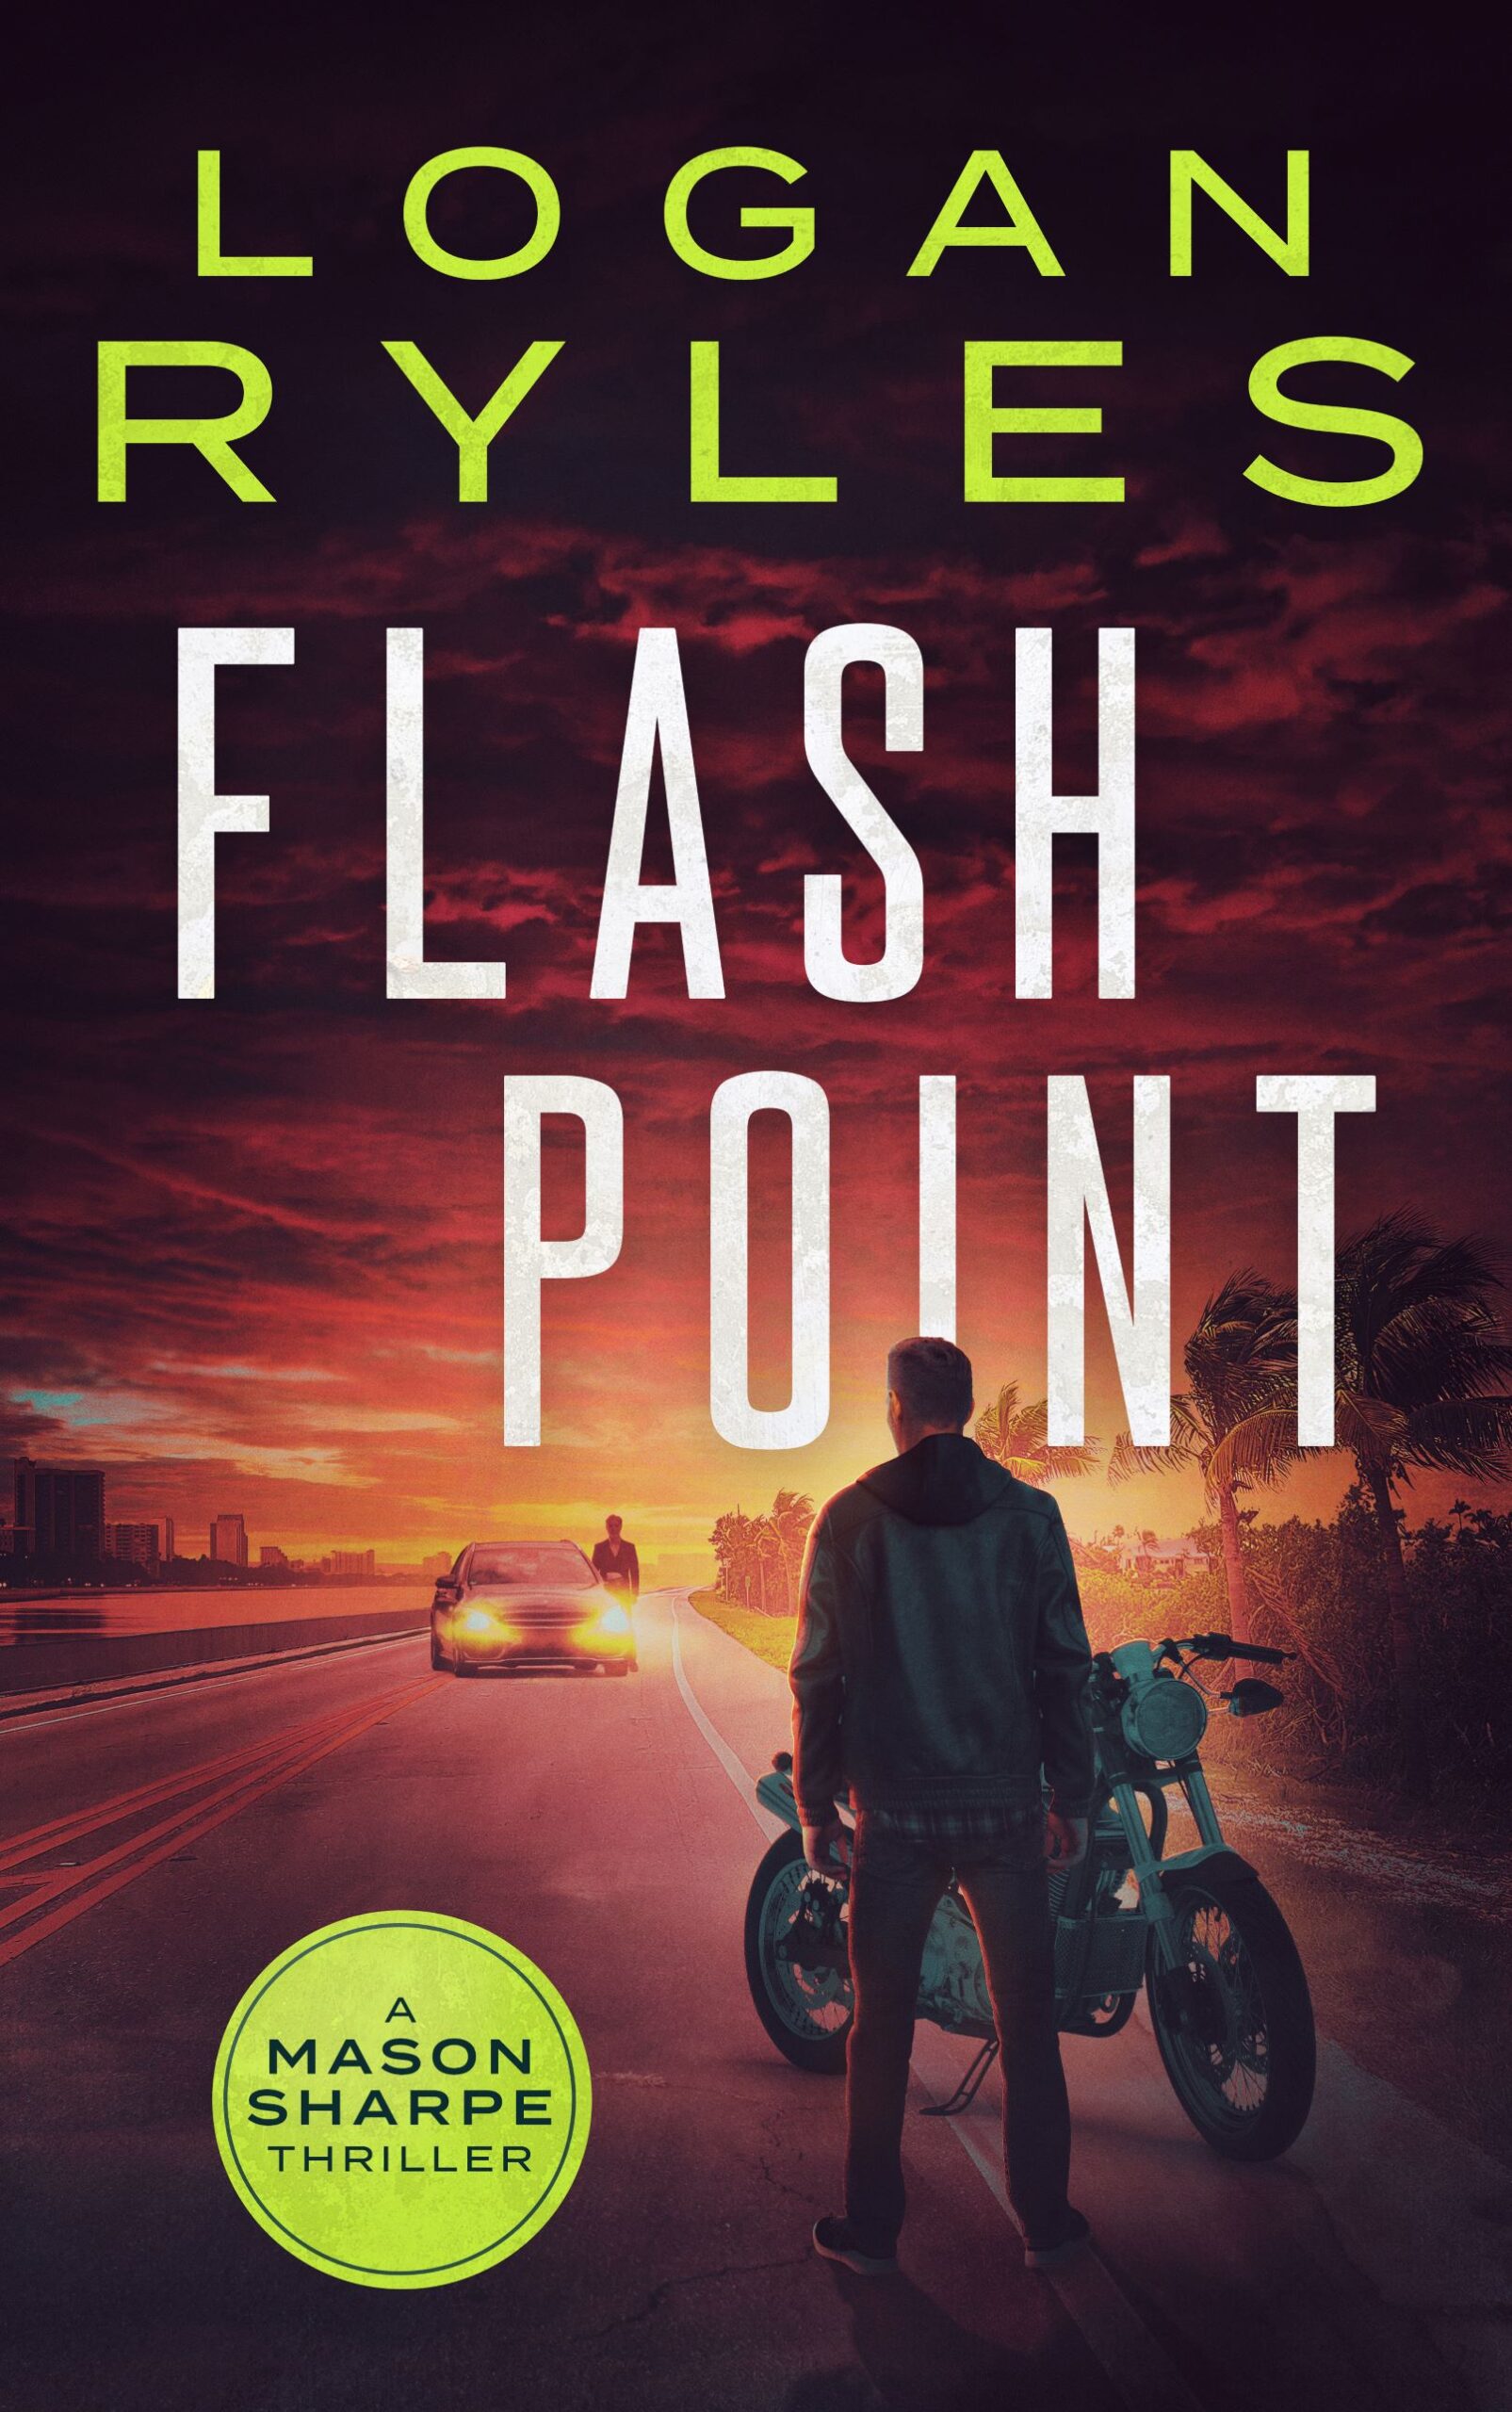 LOGAN RYLES NEW RELEASE – FLASH POINT